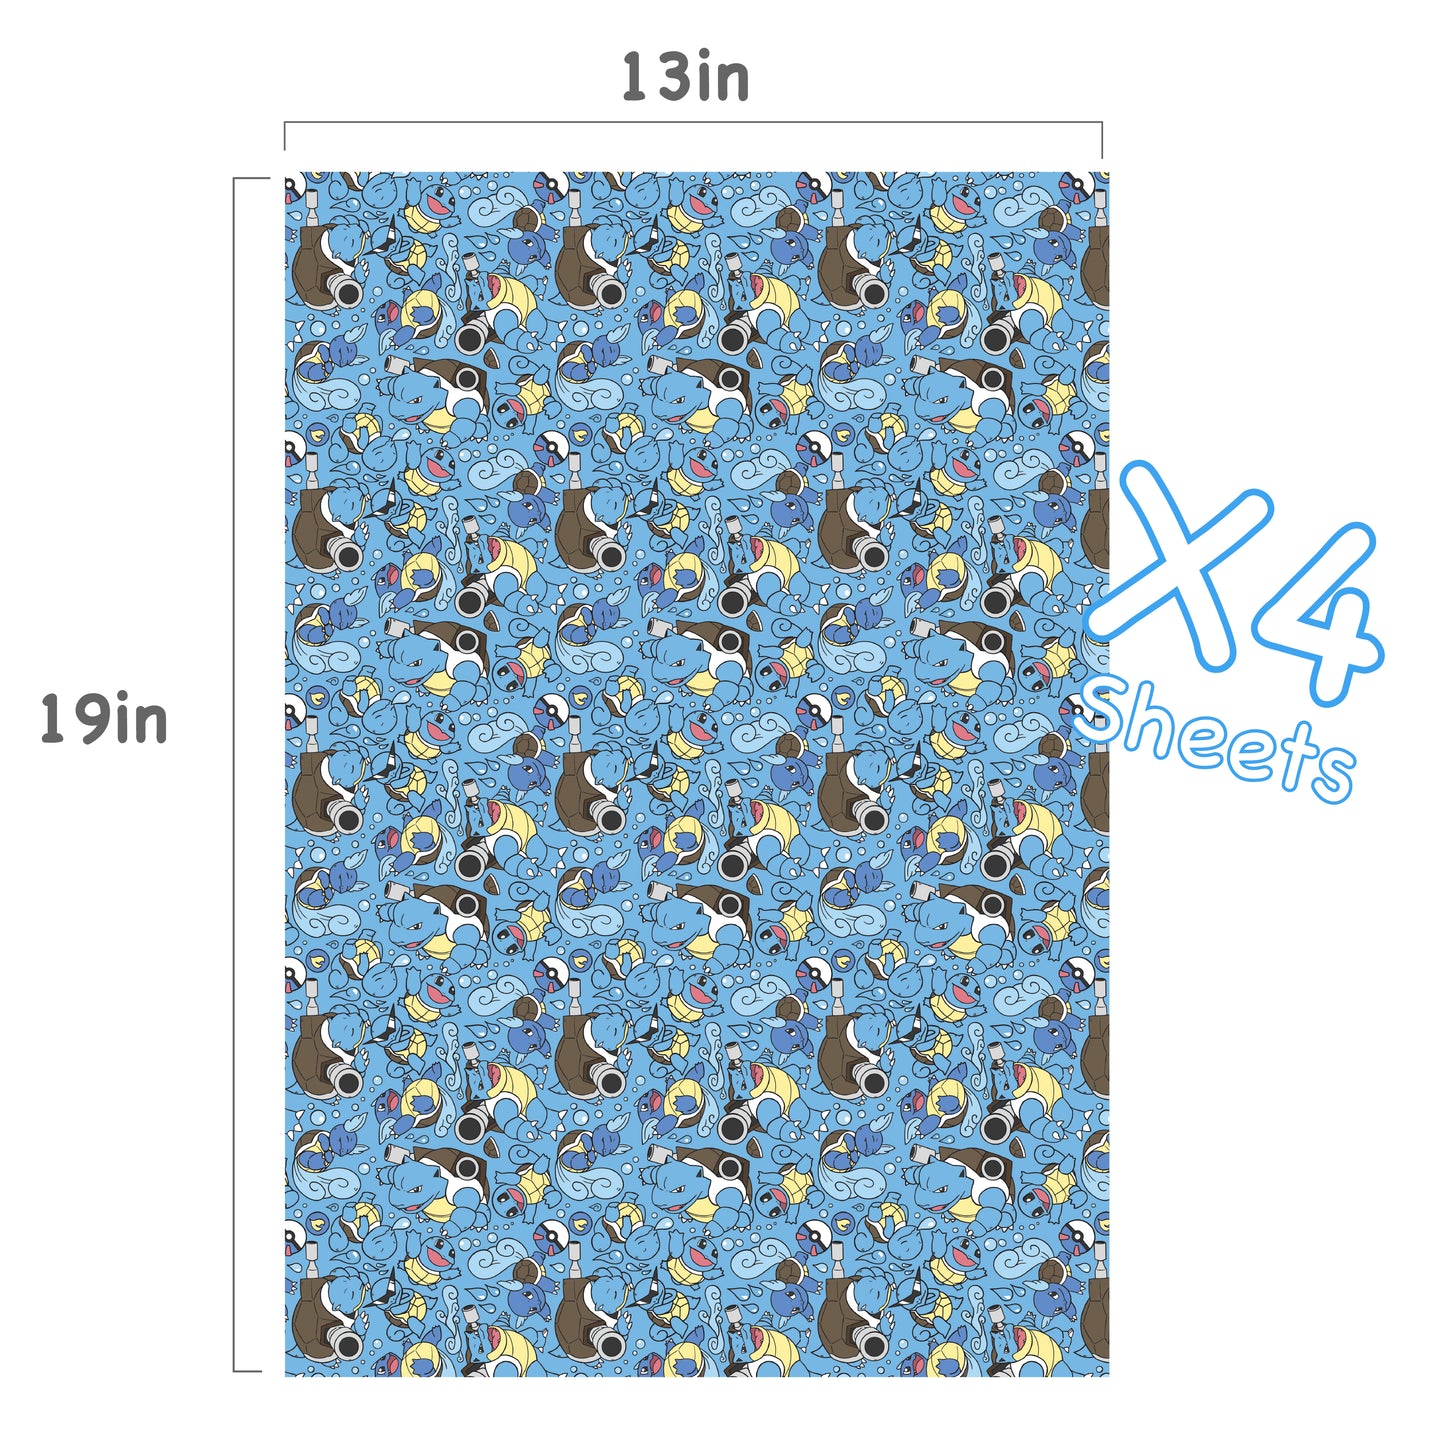 Blastoise Wrapping Paper Sheets